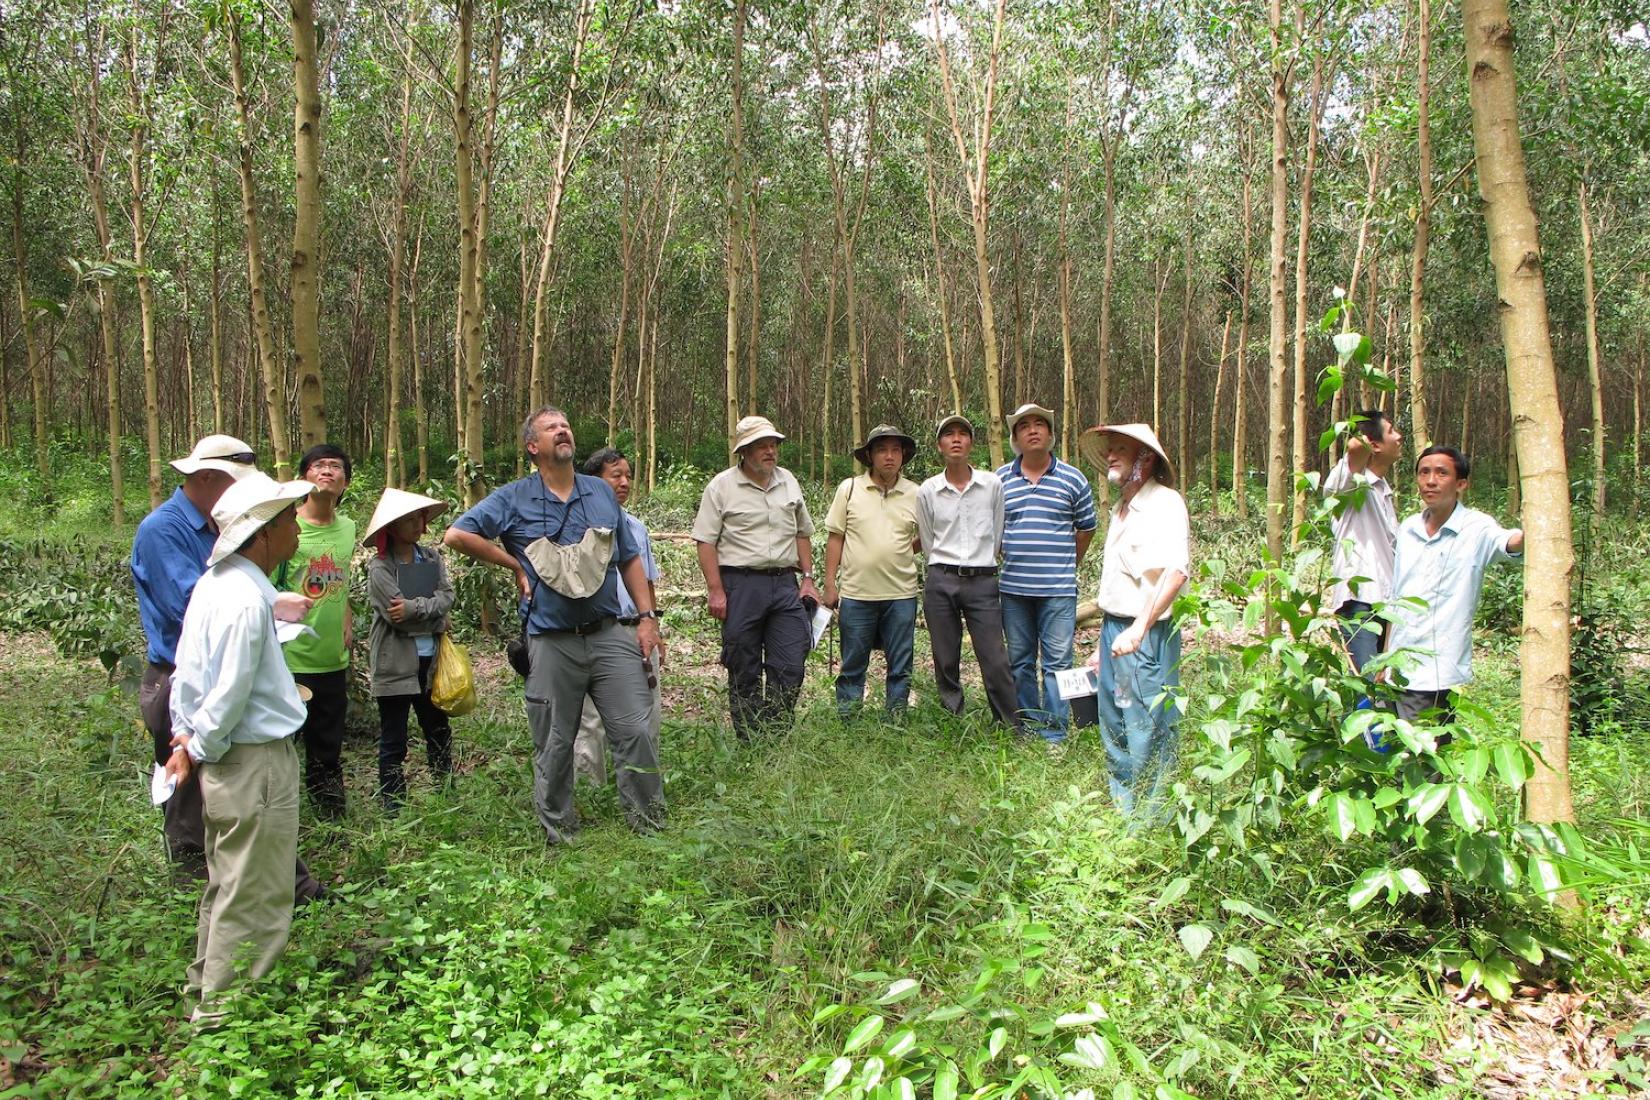 Group of people standing in a forest of young Acacia trees